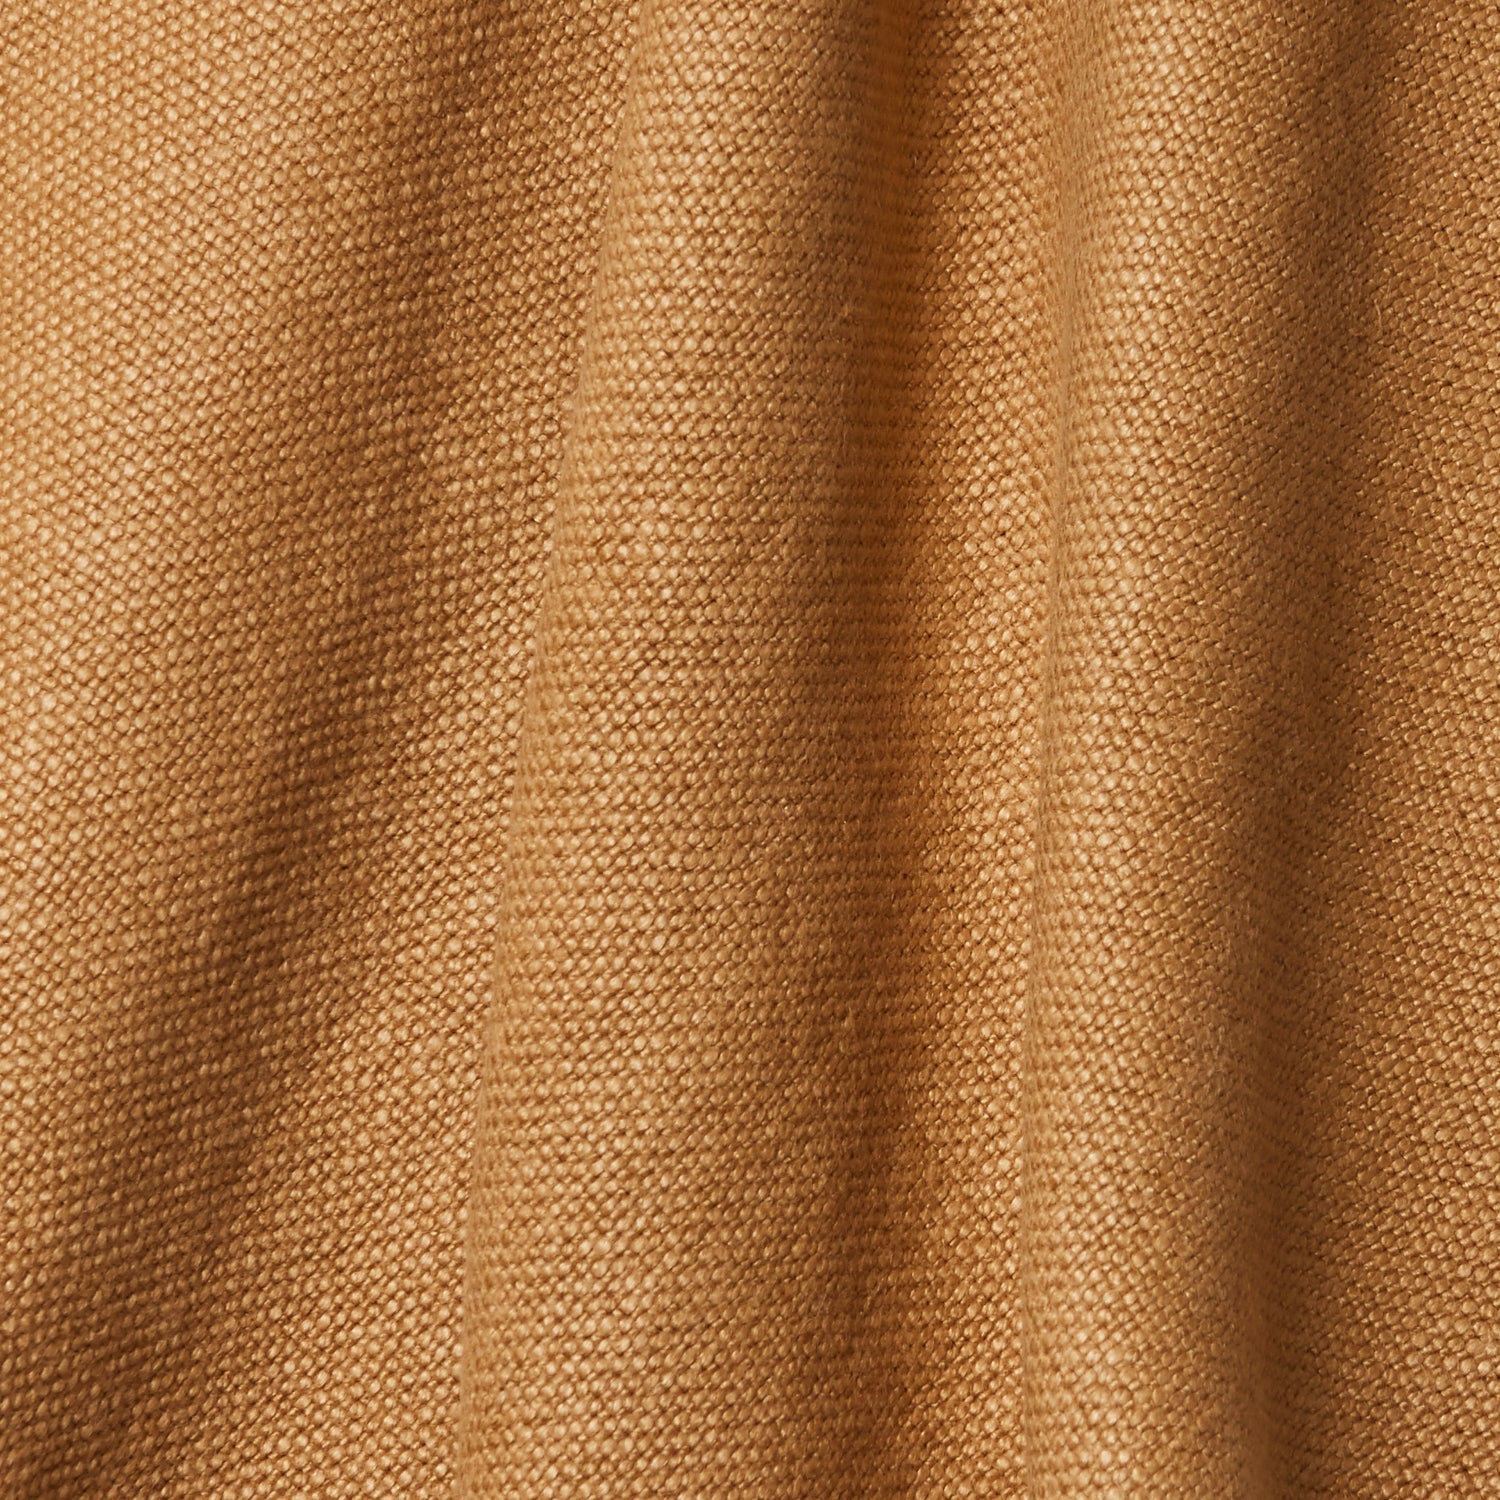 A draped swatch of old-world linen fabric in a solid tan color.